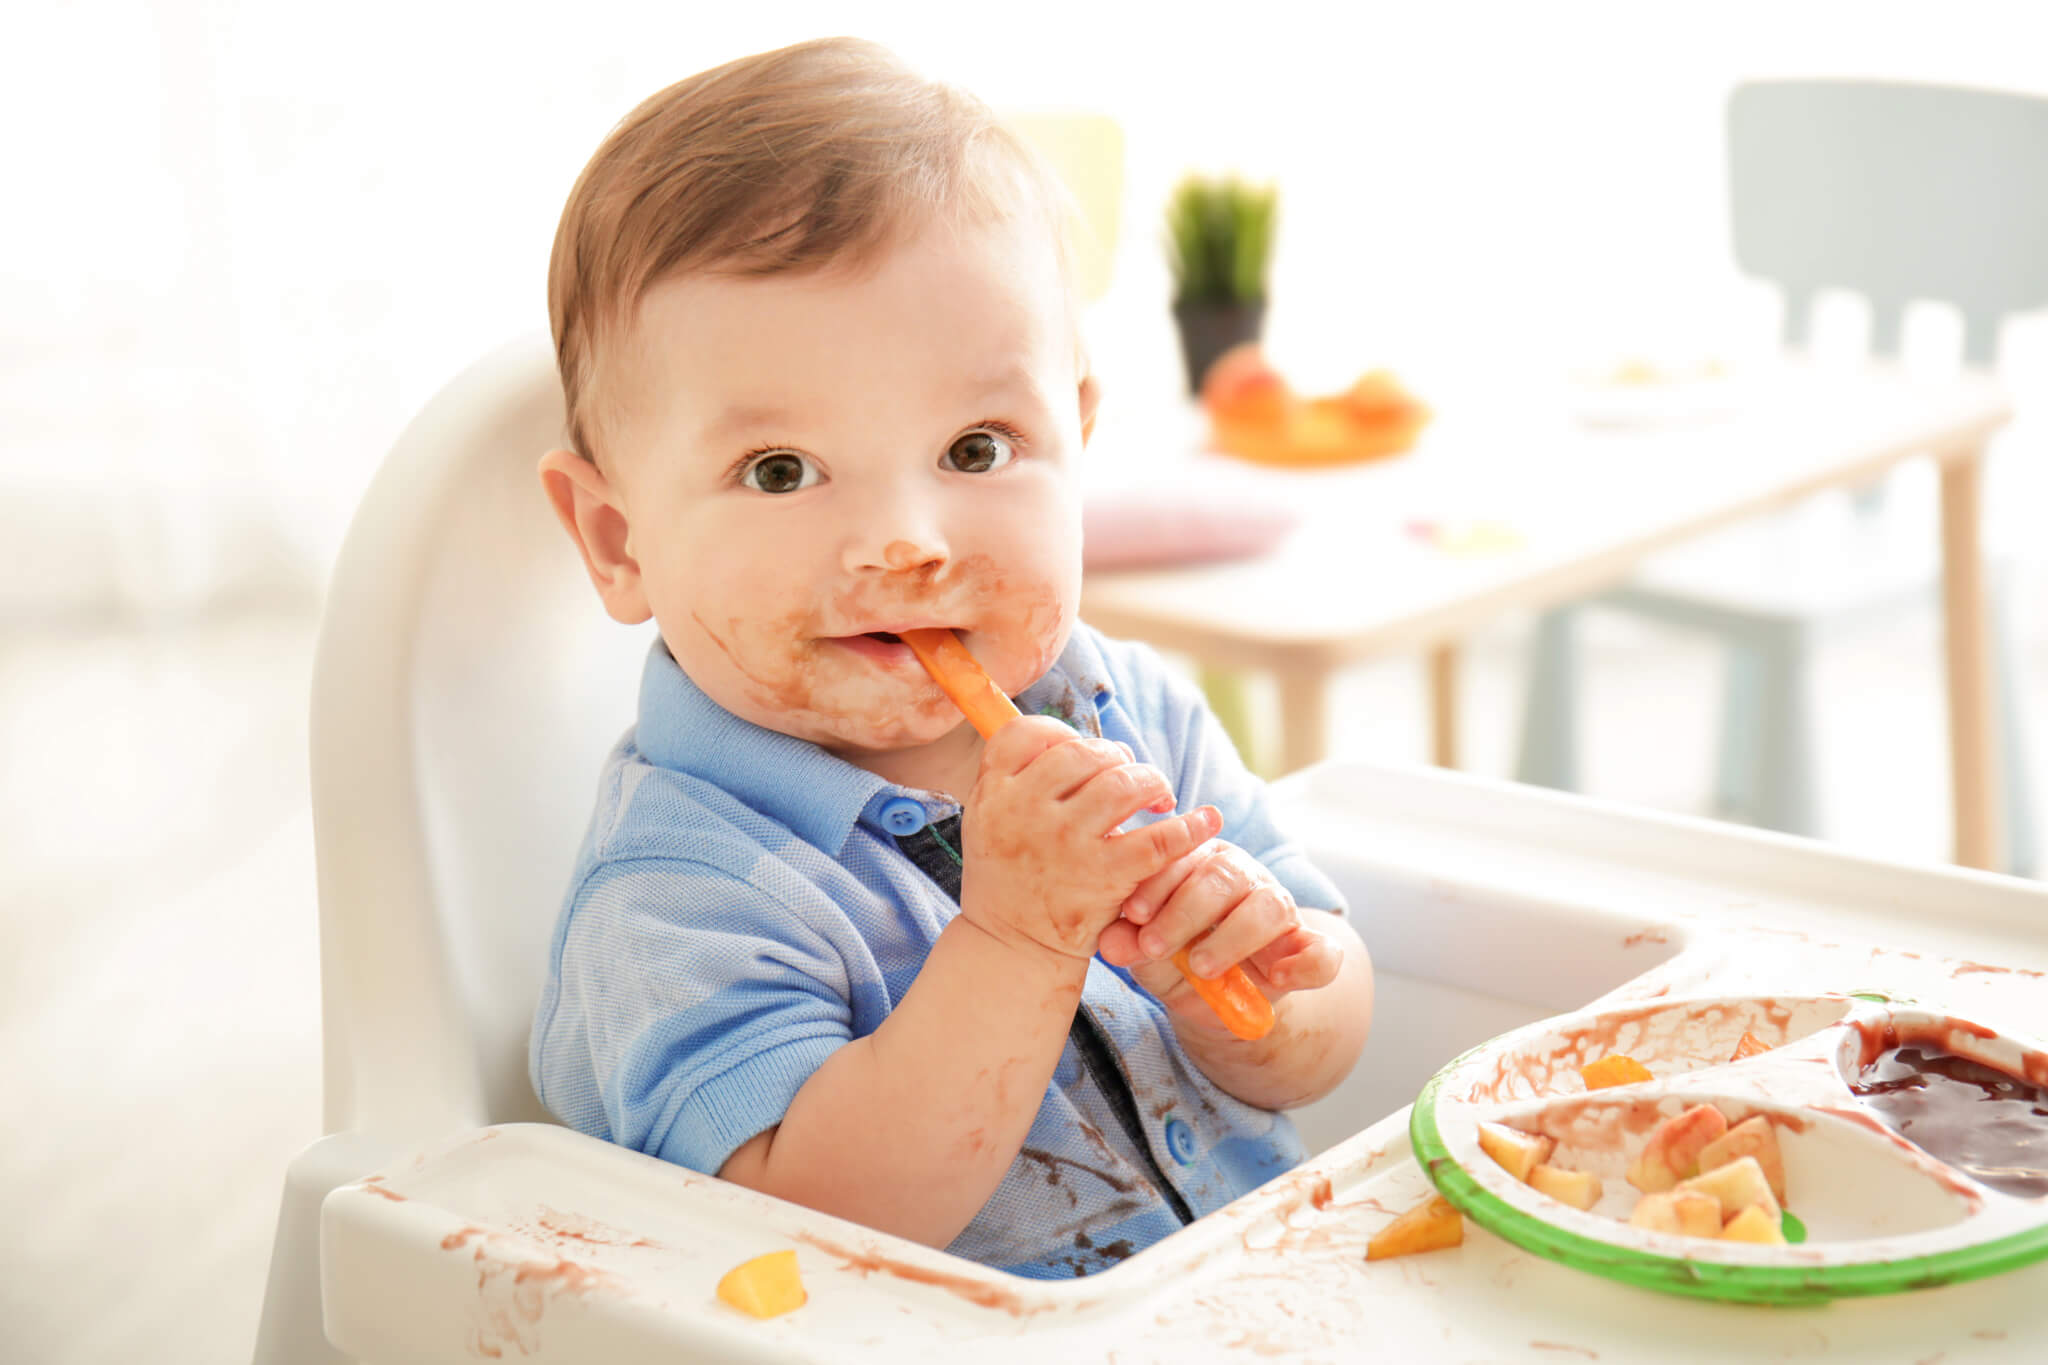 Cute messy baby eating puree at home in his high chair